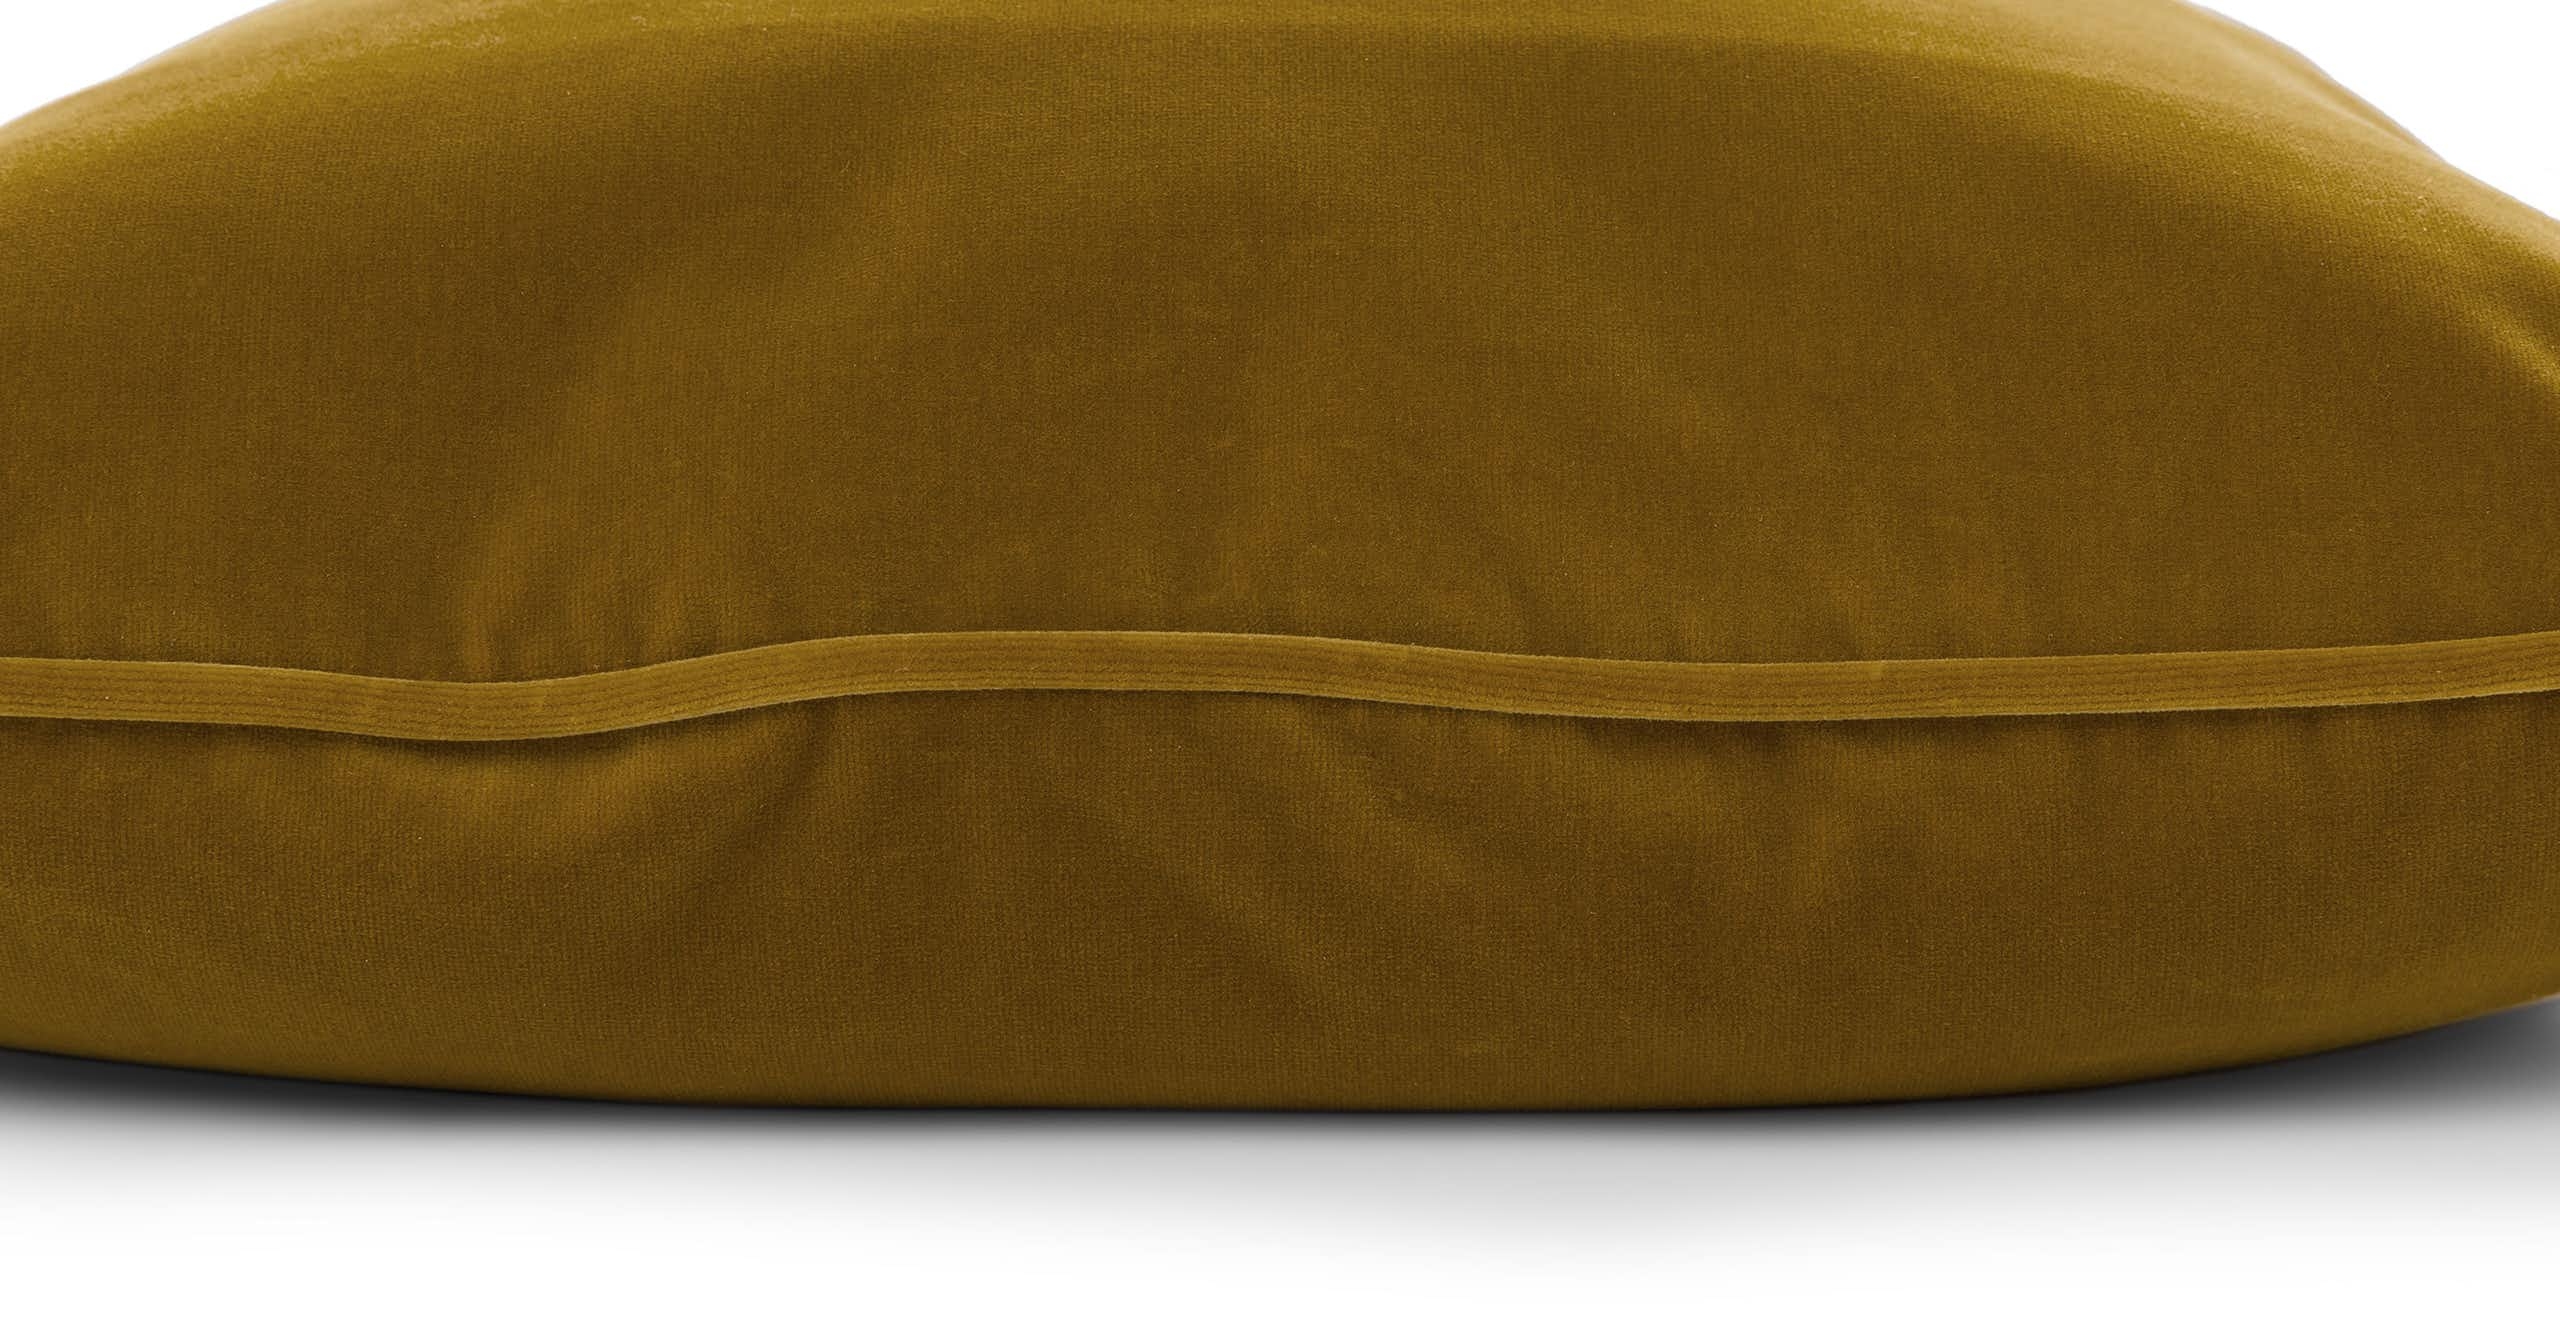 Lucca Yarrow Gold - Pillow Set of 2 - insert included - Image 2